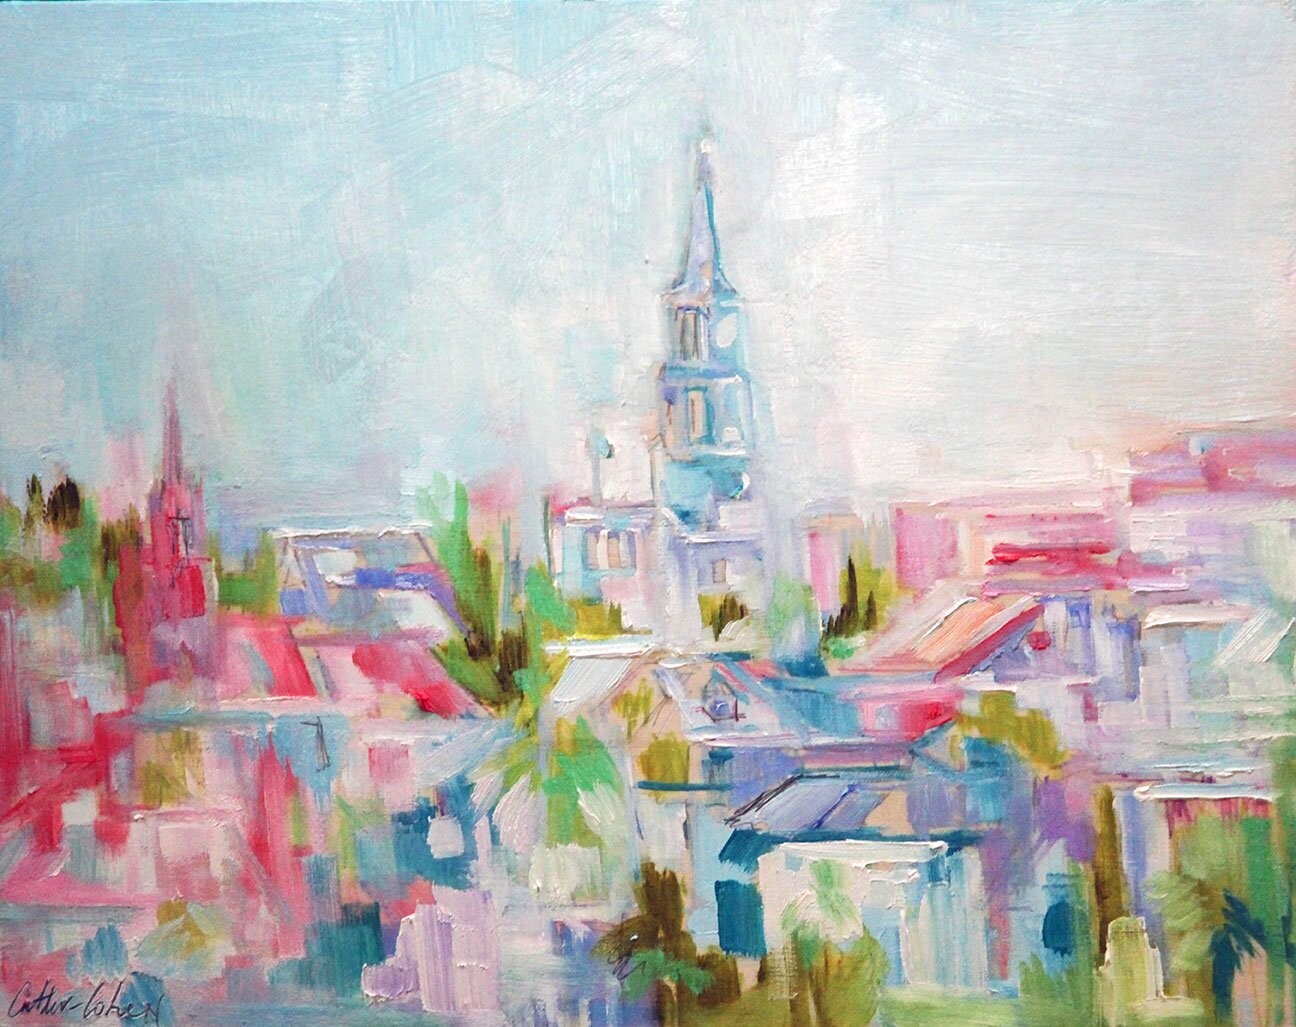 "Charleston Pastel" by Danielle Cather-Cohen